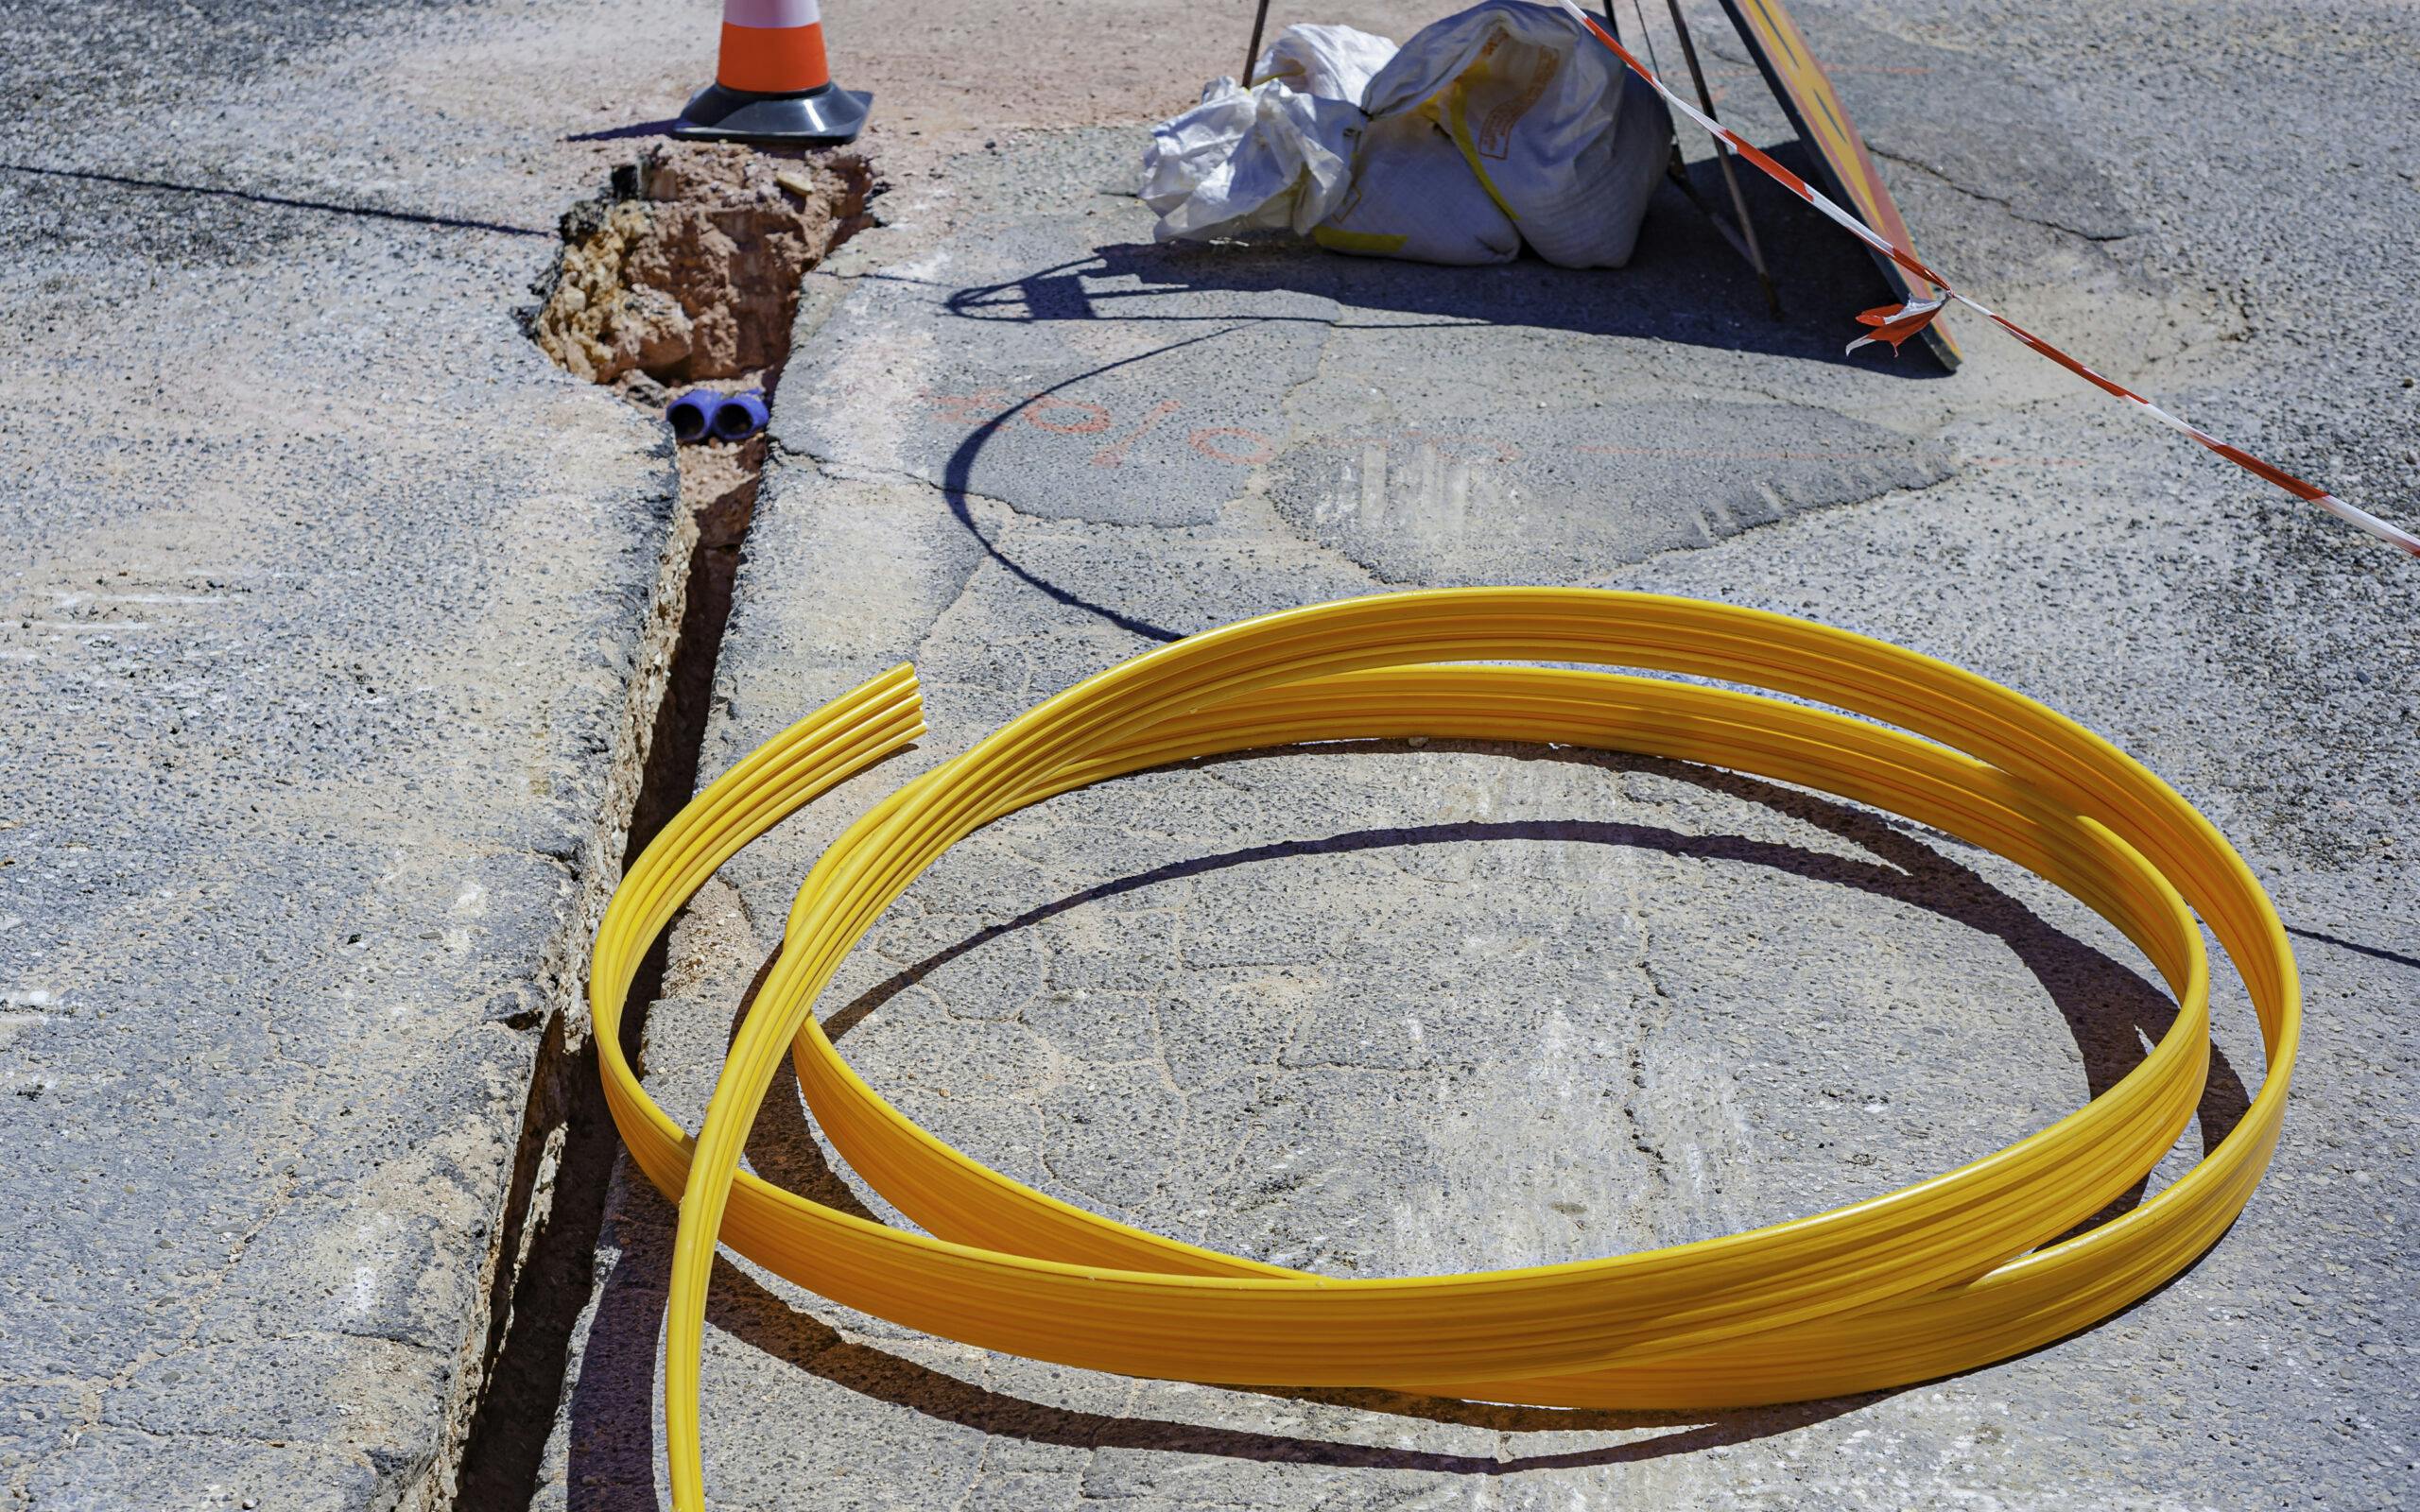 Fiber cables near a trench on a construction site